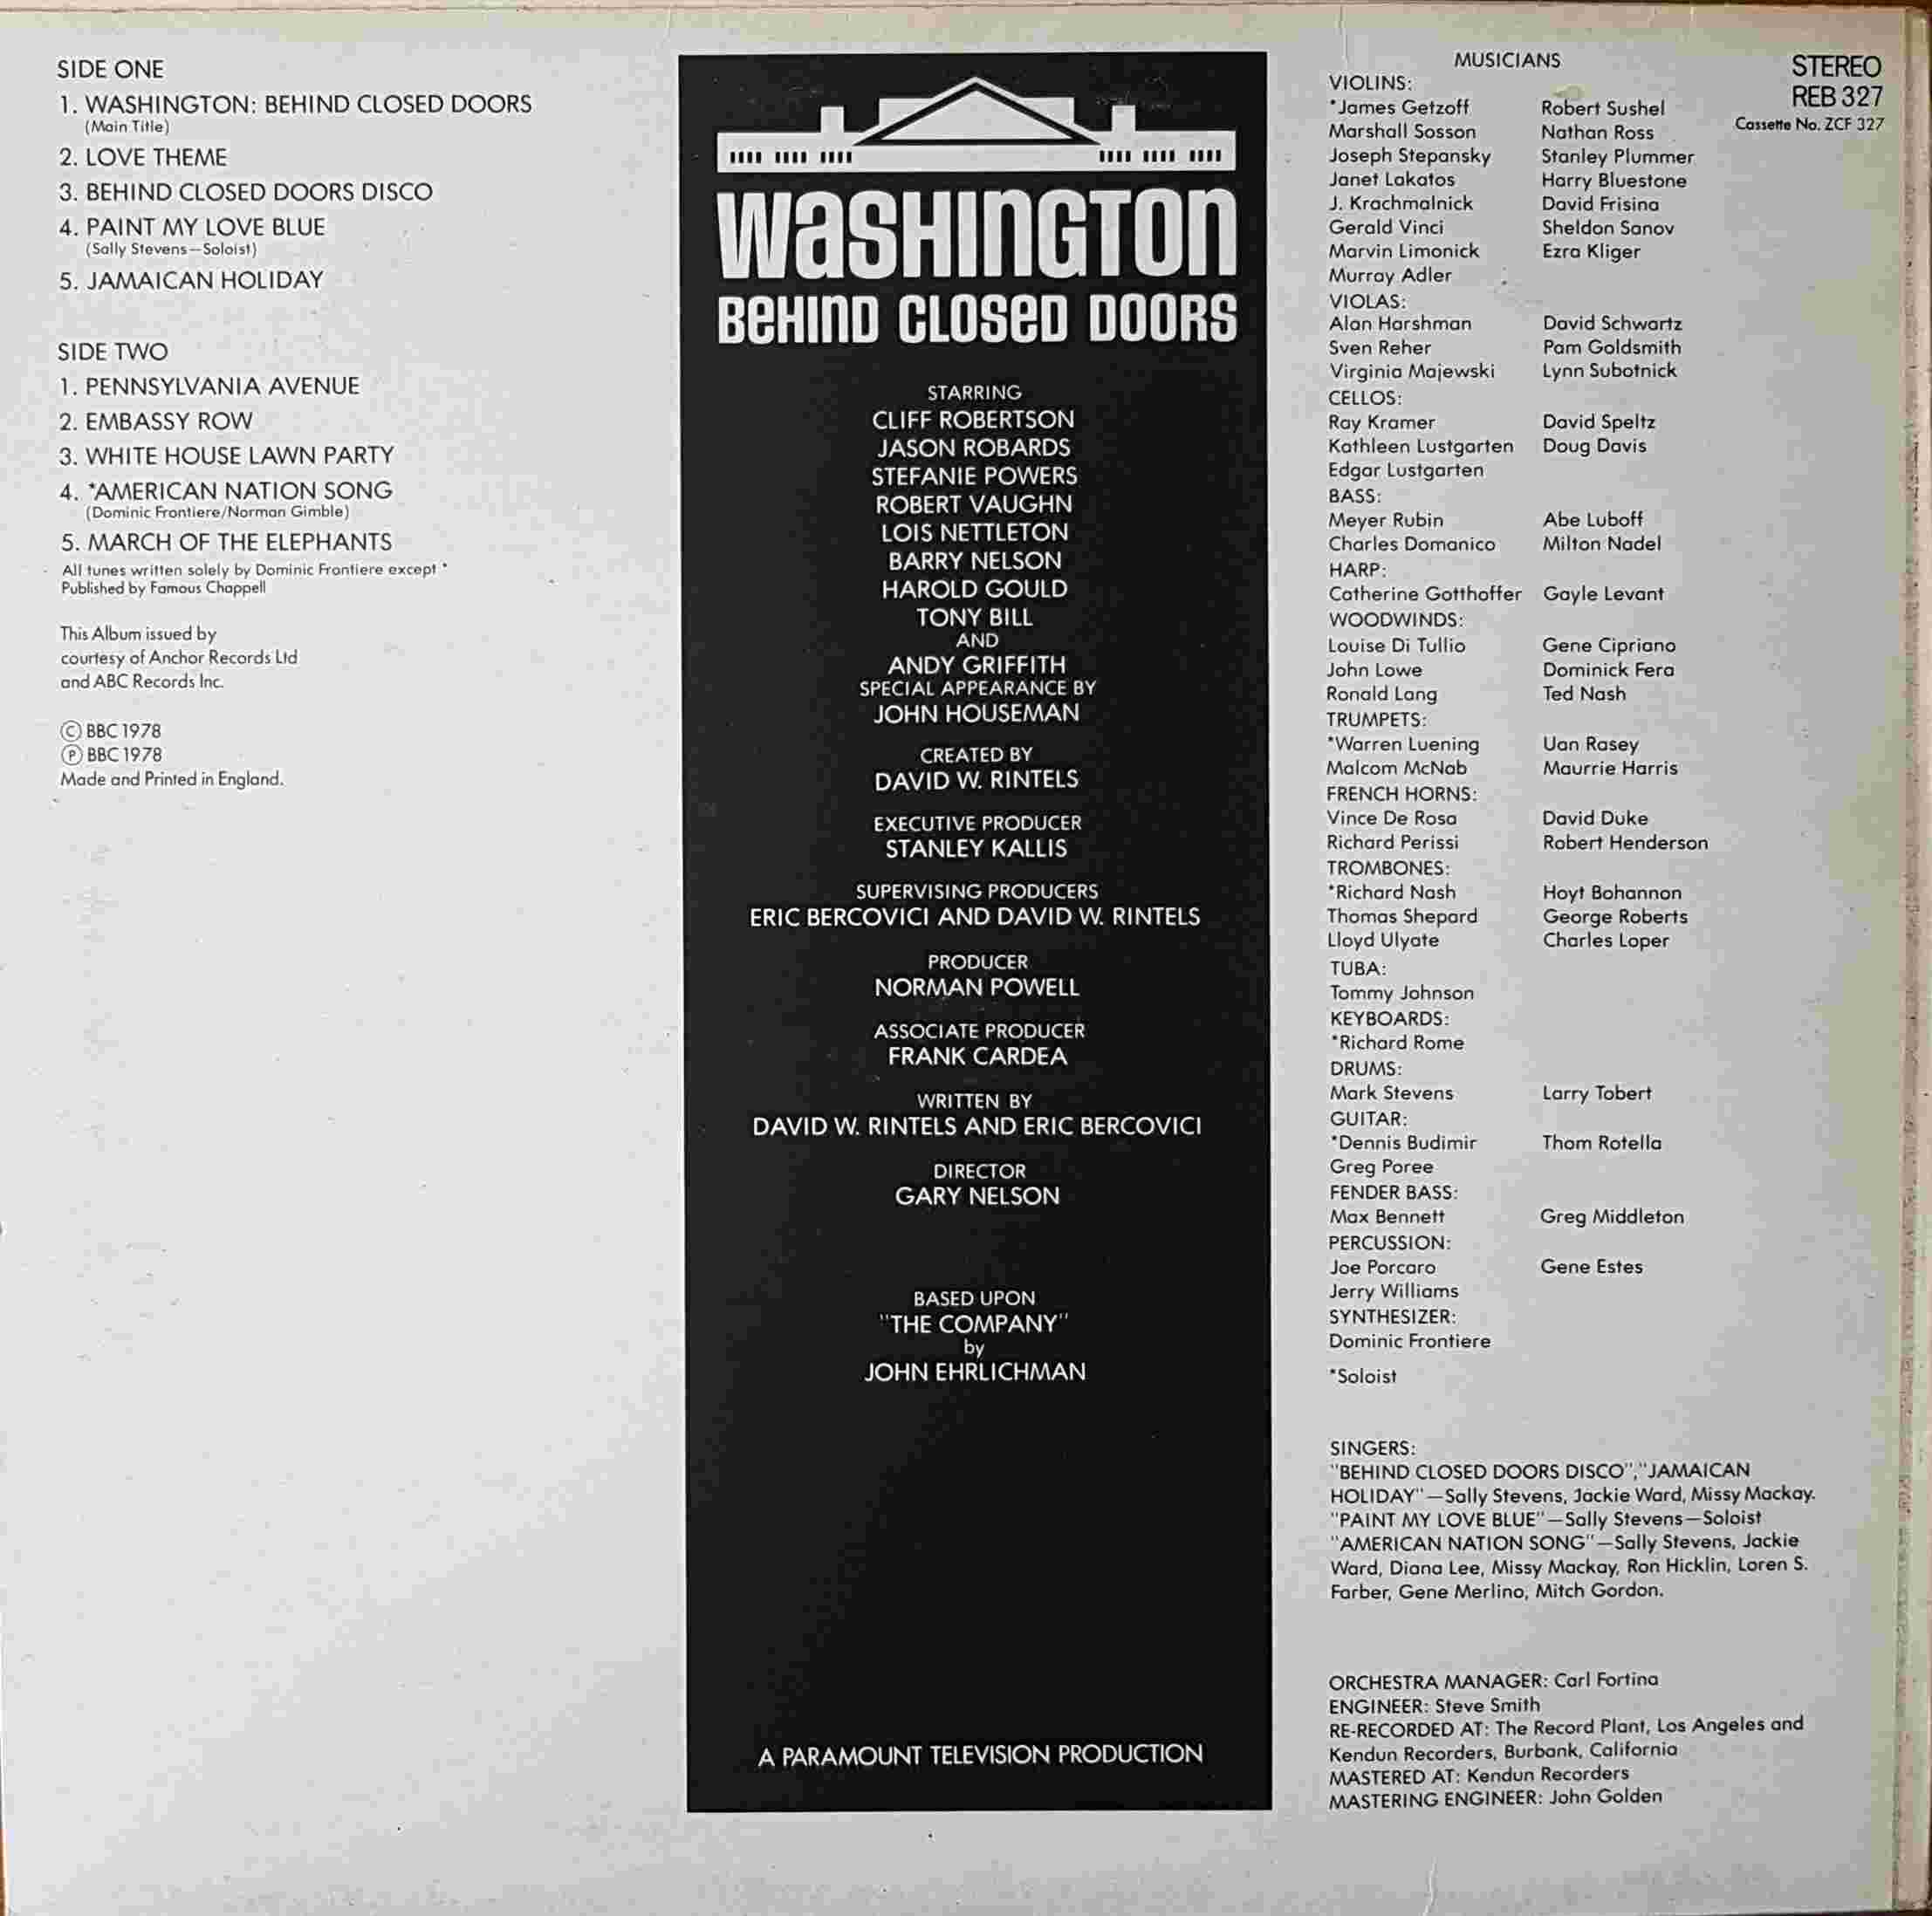 Picture of REB 327 Washington behind closed doors by artist Dominic Frontiere from the BBC records and Tapes library